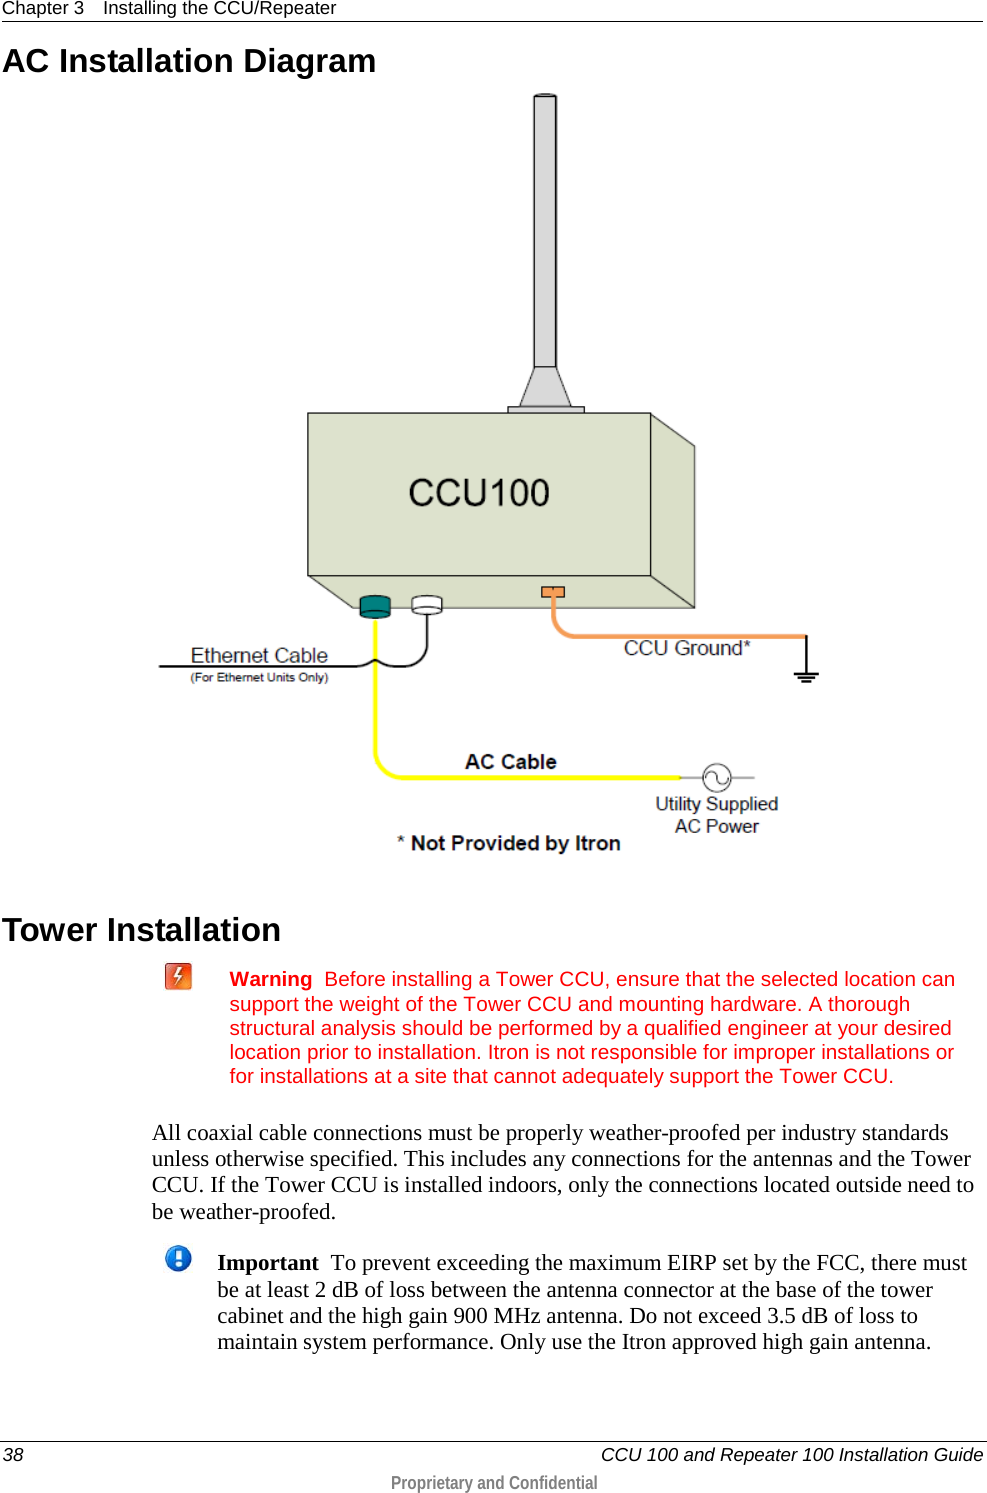 Chapter 3 Installing the CCU/Repeater  38   CCU 100 and Repeater 100 Installation Guide  Proprietary and Confidential  AC Installation Diagram   Tower Installation   Warning  Before installing a Tower CCU, ensure that the selected location can support the weight of the Tower CCU and mounting hardware. A thorough structural analysis should be performed by a qualified engineer at your desired location prior to installation. Itron is not responsible for improper installations or for installations at a site that cannot adequately support the Tower CCU.   All coaxial cable connections must be properly weather-proofed per industry standards unless otherwise specified. This includes any connections for the antennas and the Tower CCU. If the Tower CCU is installed indoors, only the connections located outside need to be weather-proofed.   Important  To prevent exceeding the maximum EIRP set by the FCC, there must be at least 2 dB of loss between the antenna connector at the base of the tower cabinet and the high gain 900 MHz antenna. Do not exceed 3.5 dB of loss to maintain system performance. Only use the Itron approved high gain antenna. 